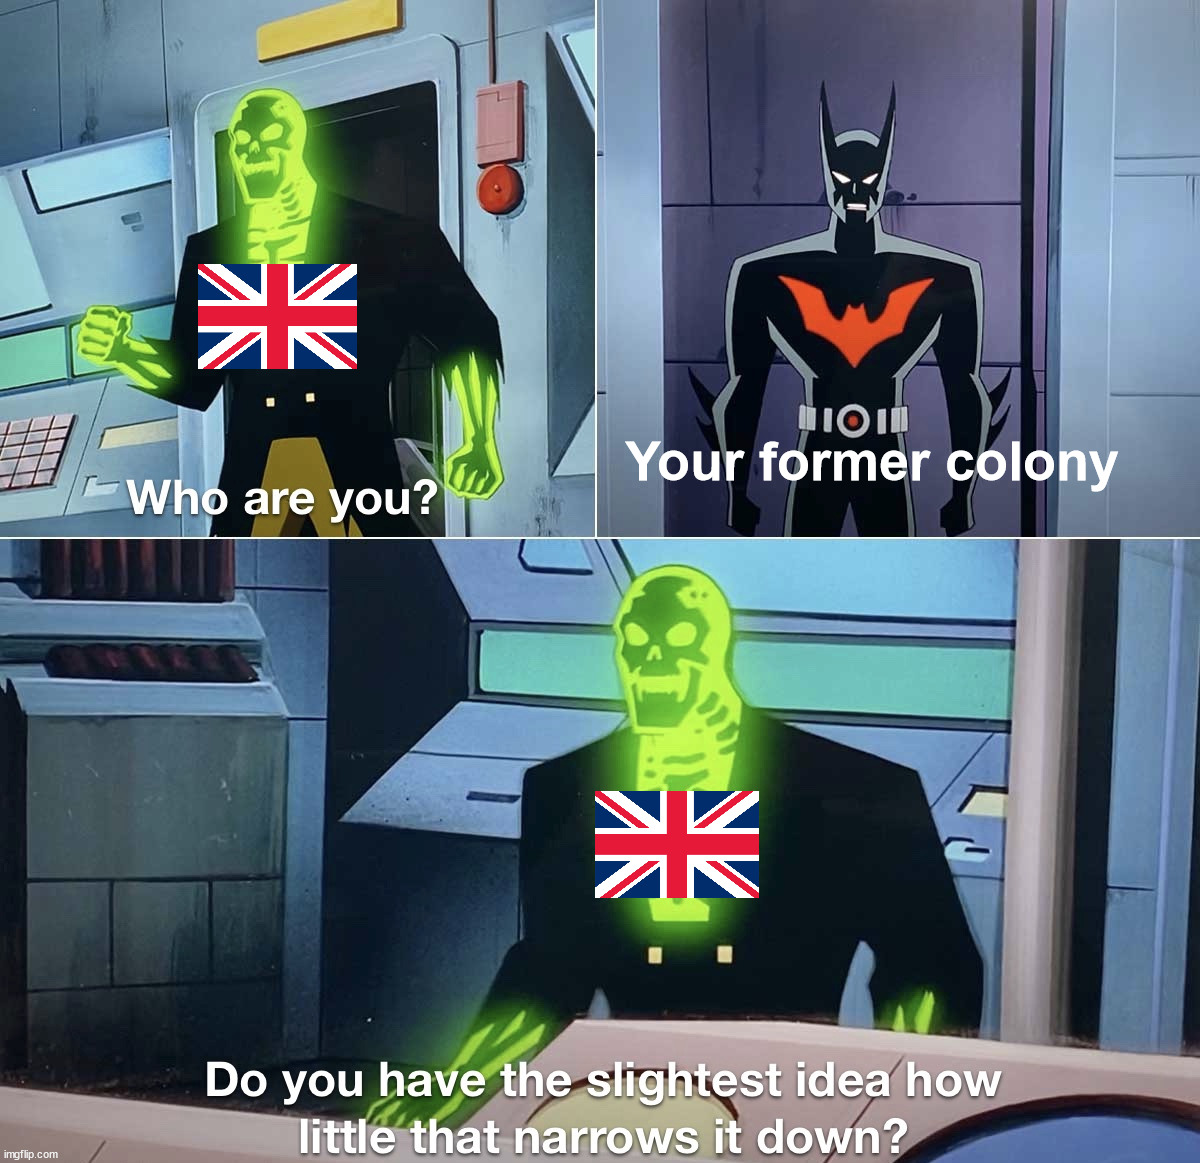 Do you have the slightest idea how little that narrows it down? | Your former colony | image tagged in do you have the slightest idea how little that narrows it down,british empire,united kingdom,conolialism | made w/ Imgflip meme maker